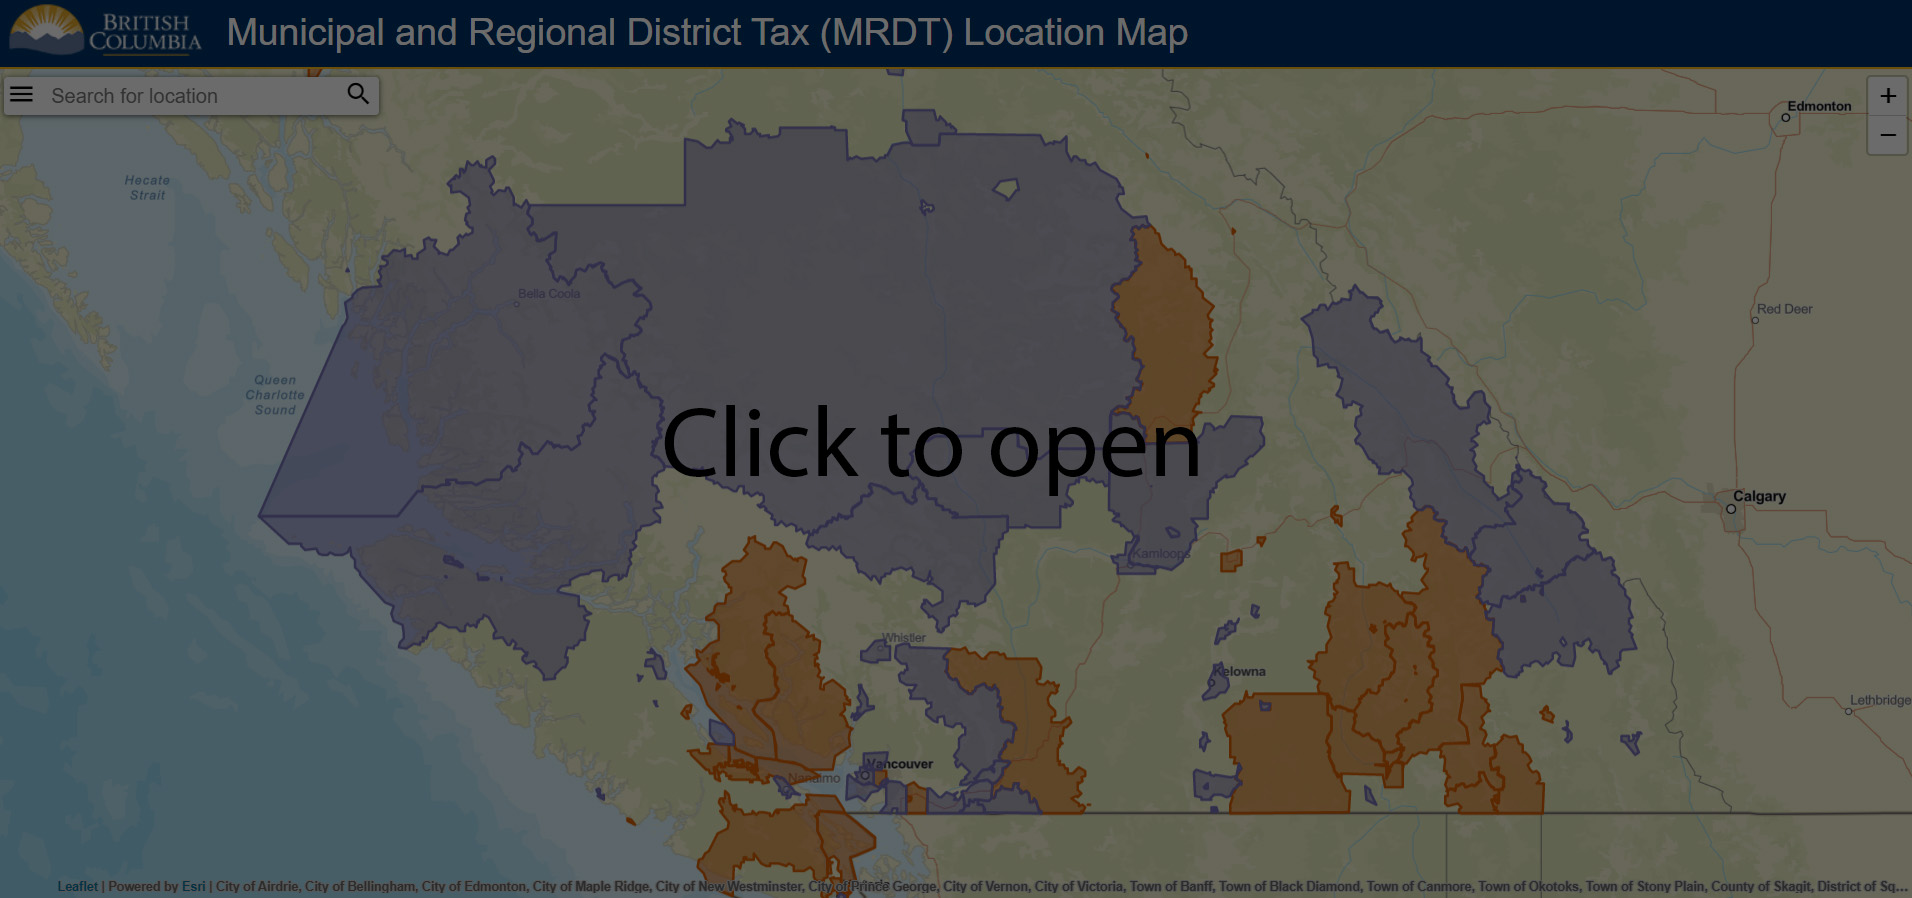 Image link to MRDT location map